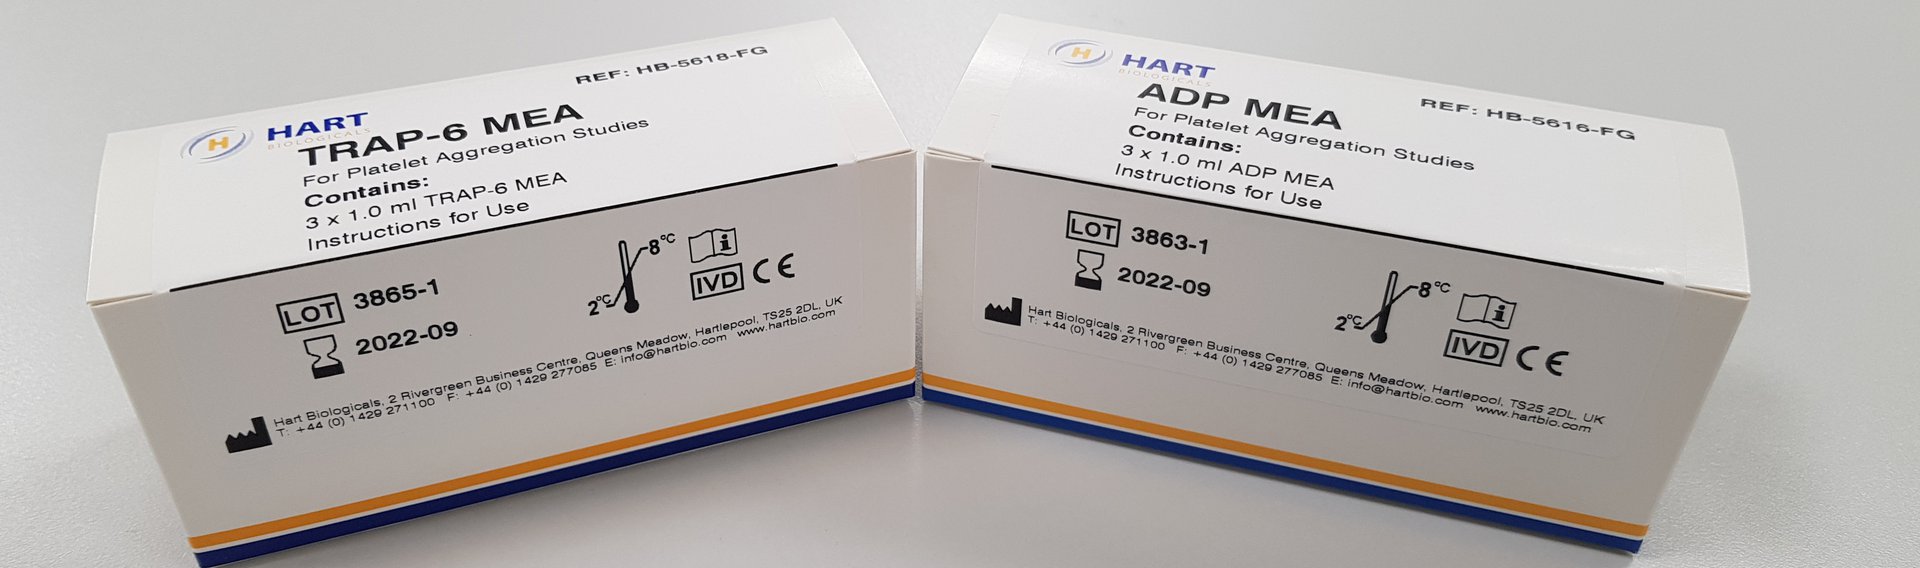 Hart Bio launches ADP MEA and TRAP-6 MEA  Image